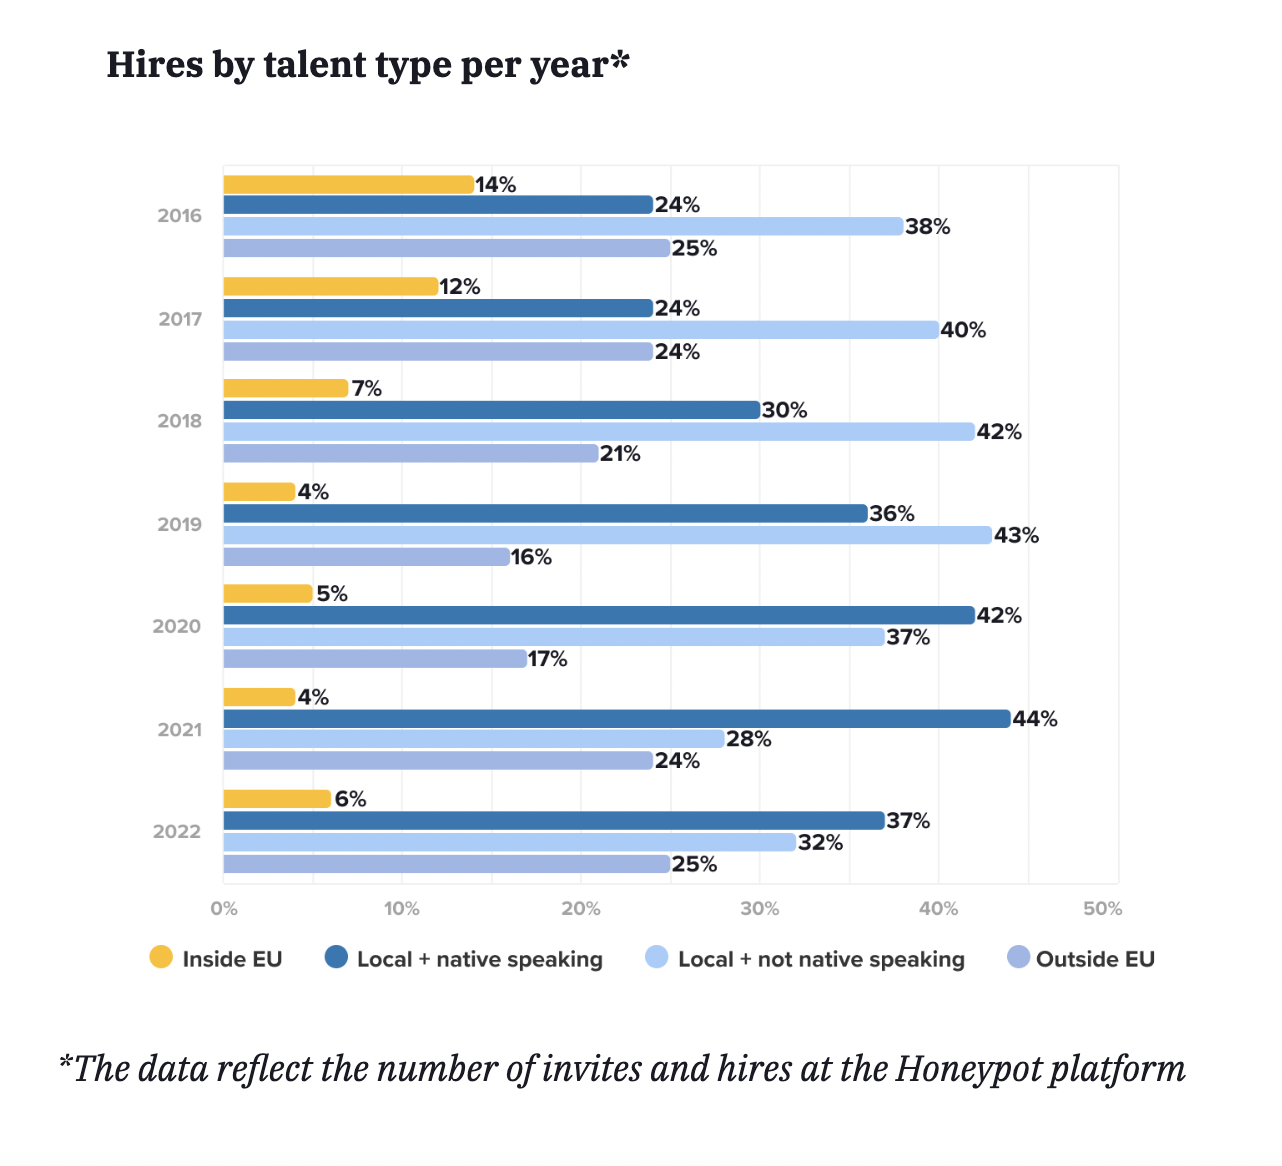 GERMANY Hires per talent type per year (Germany)